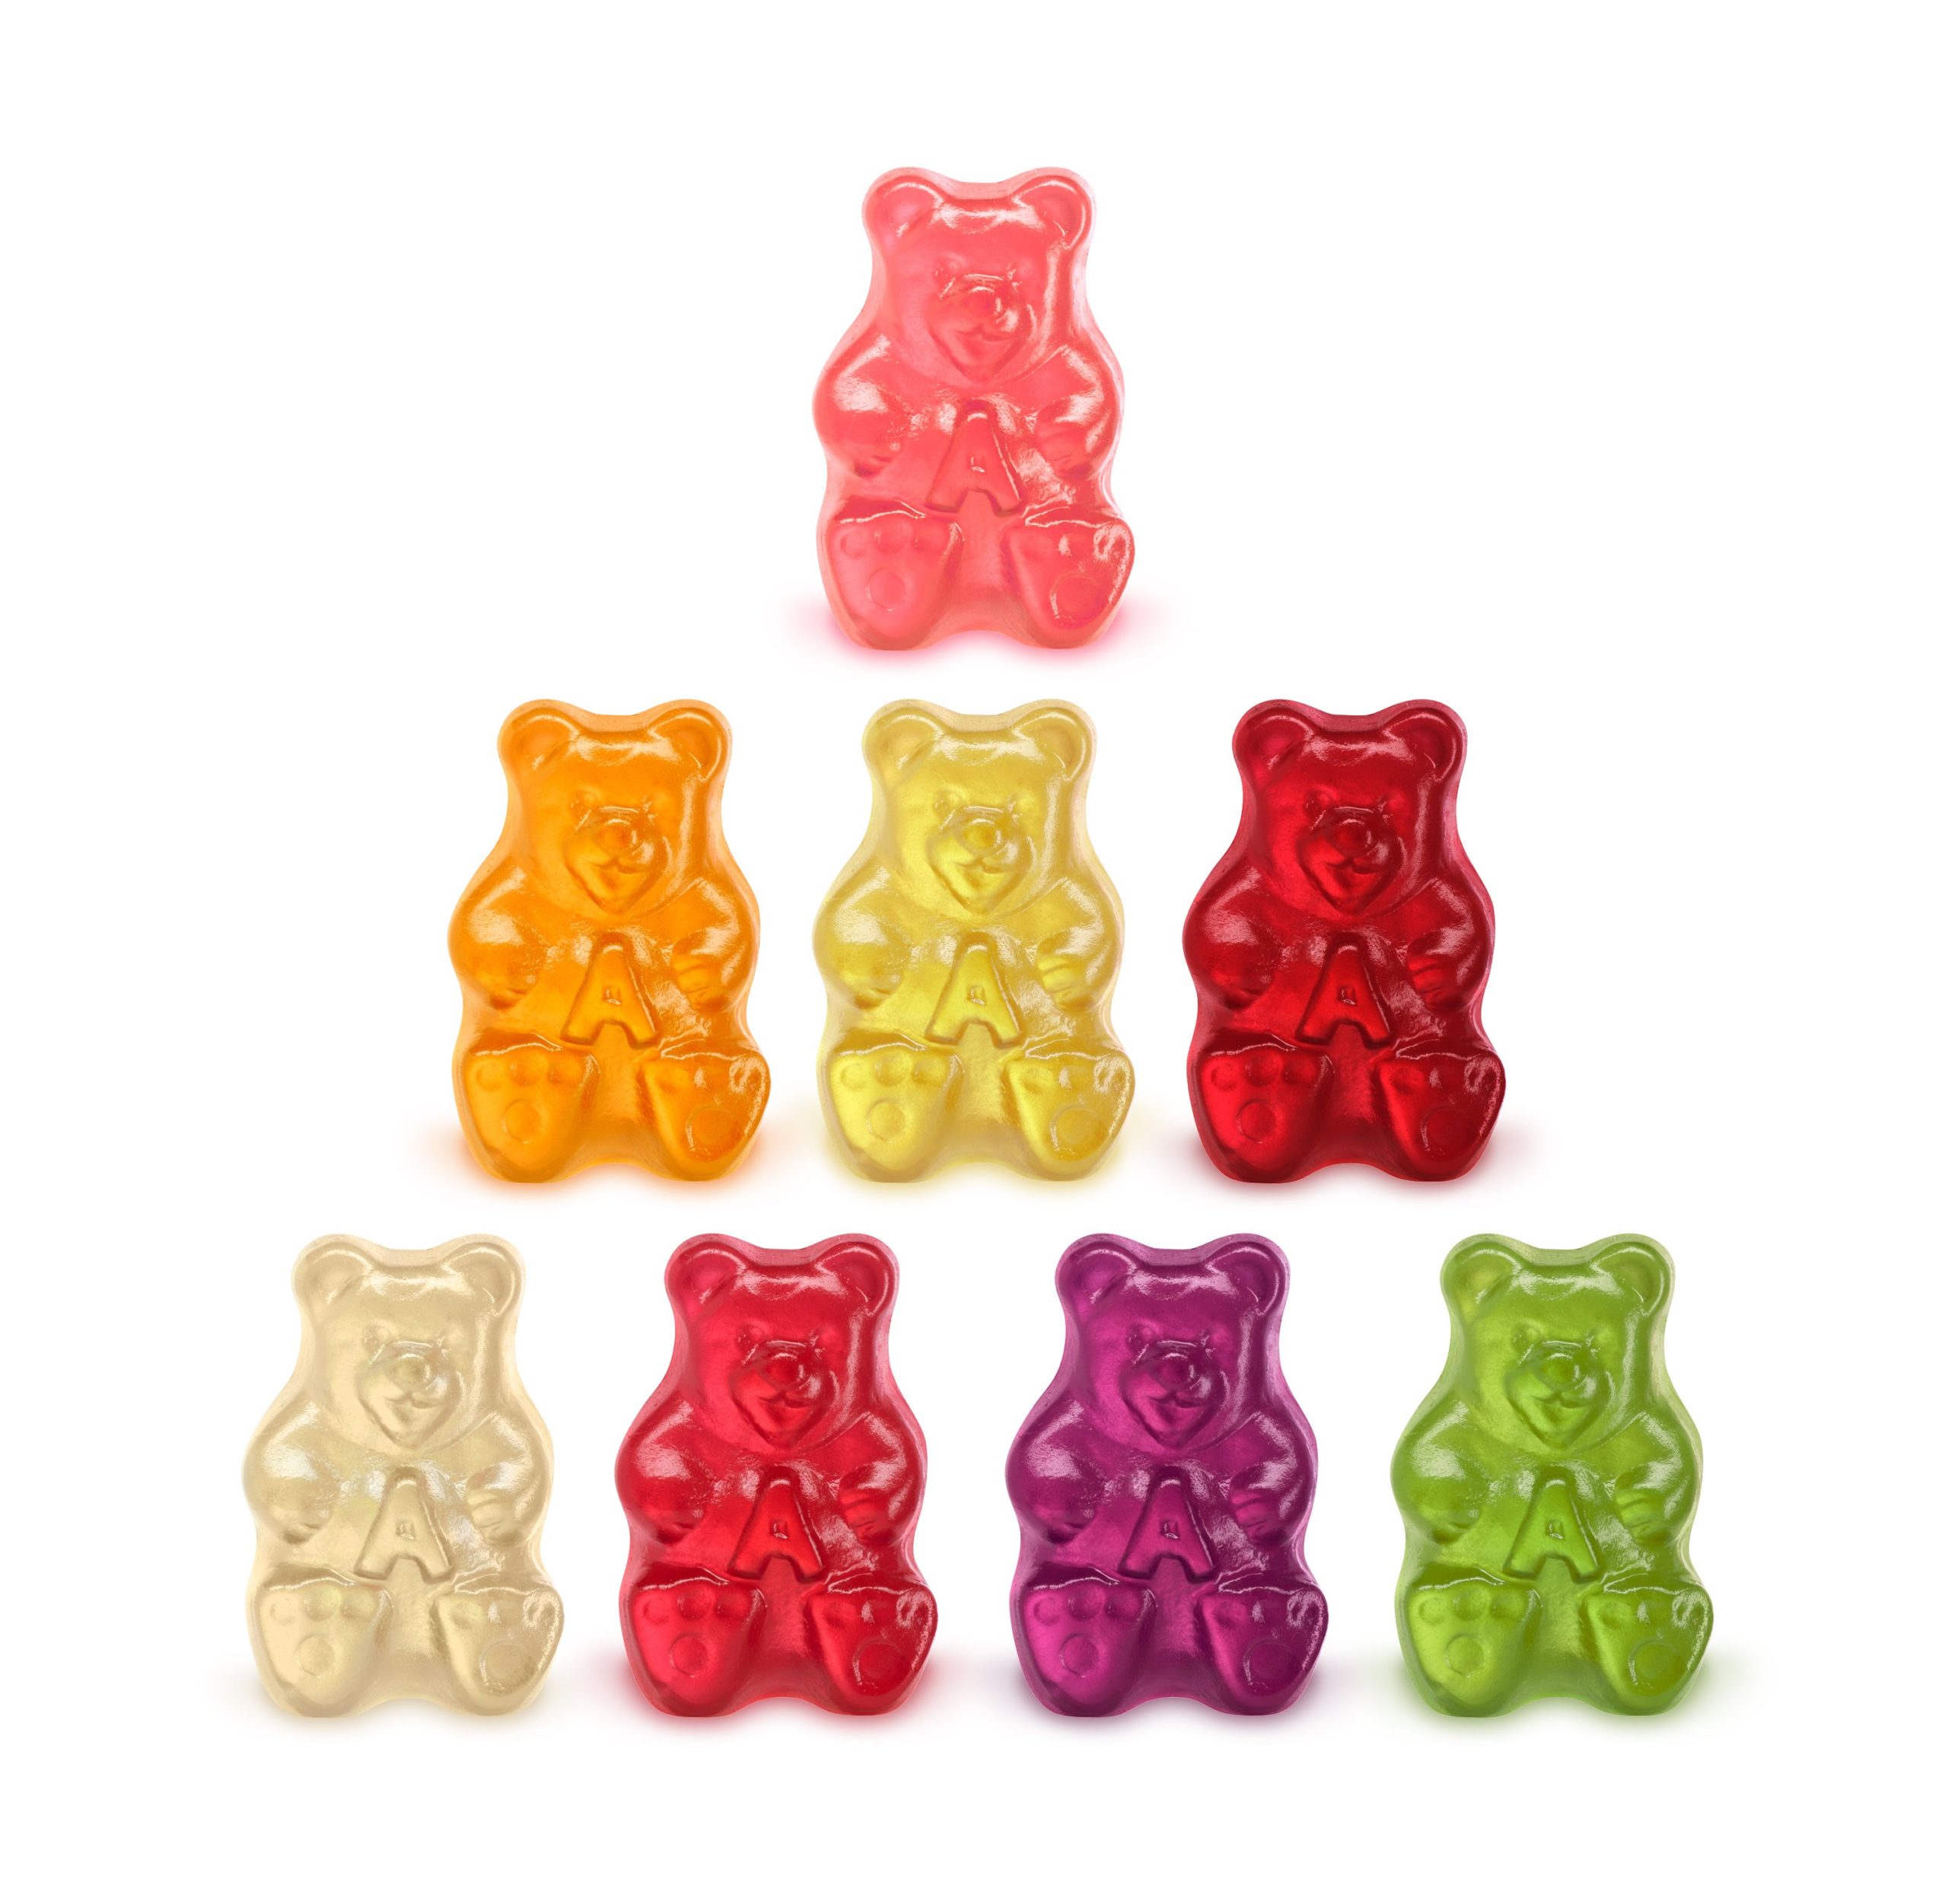 Ultimate 8 Flavor Gummi Bears by Albanese Zimmerman's Nuts and Candies